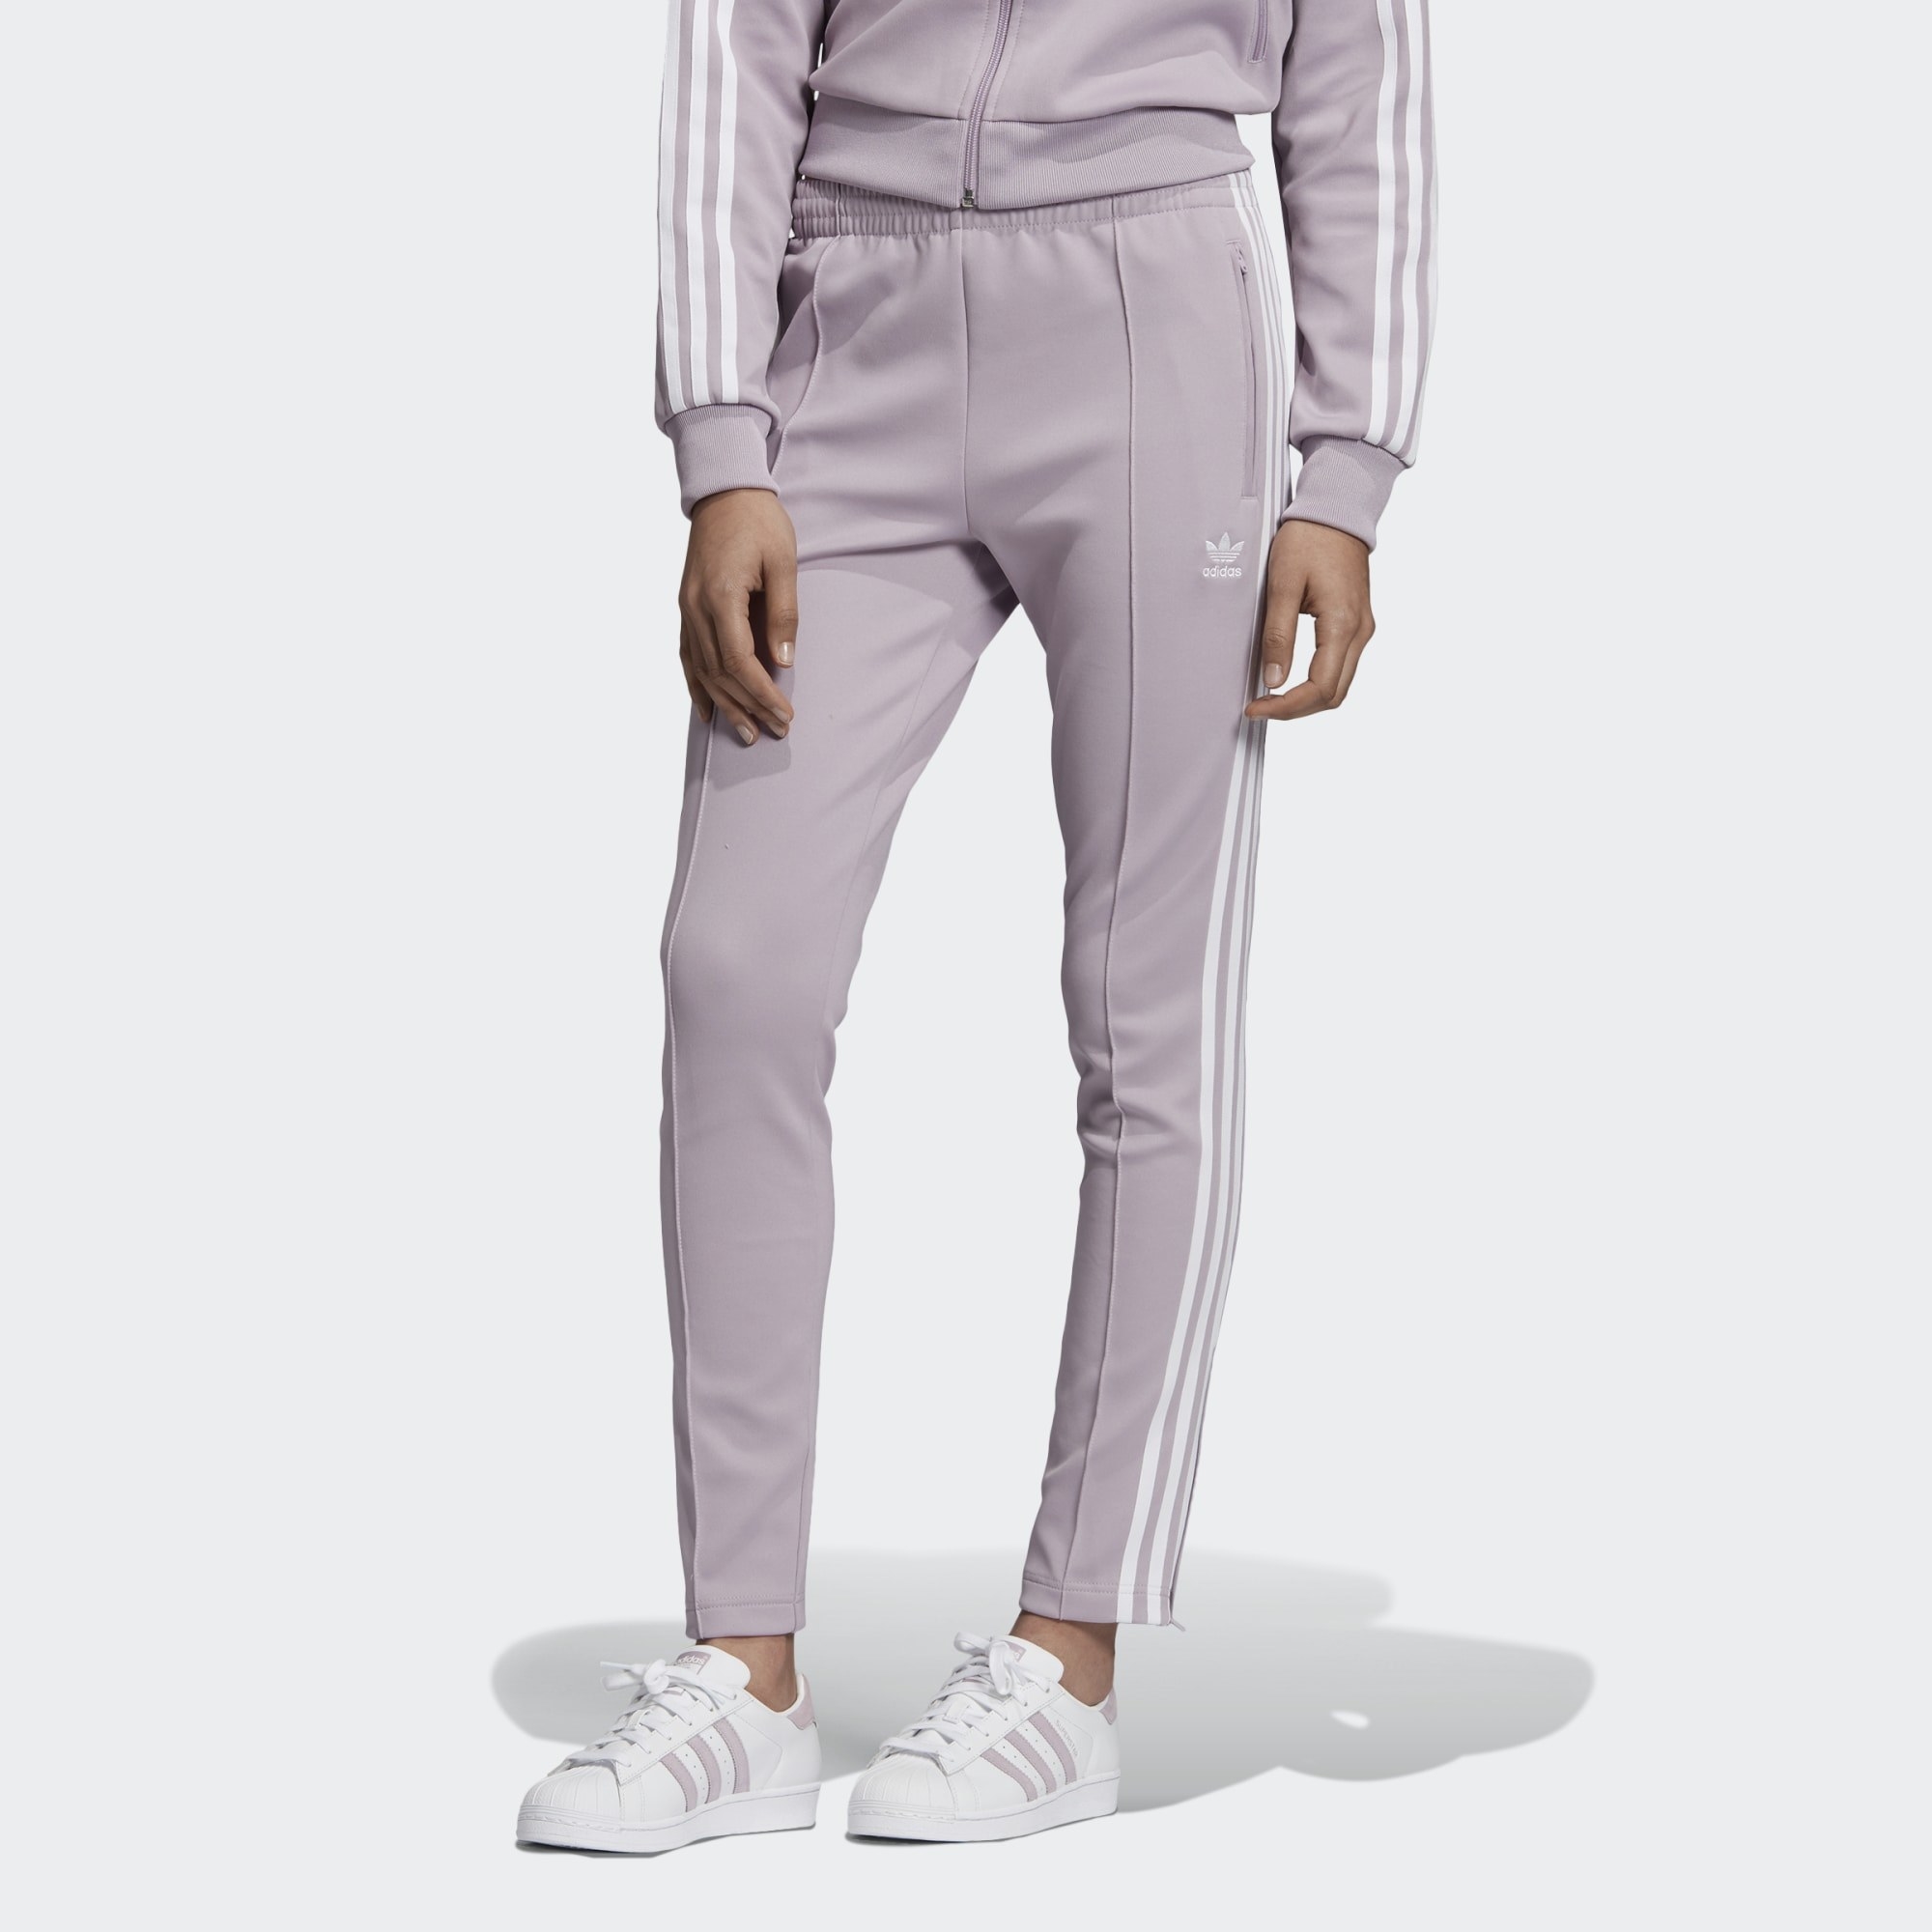 Soft violet track pants paired with full matching ensemble 